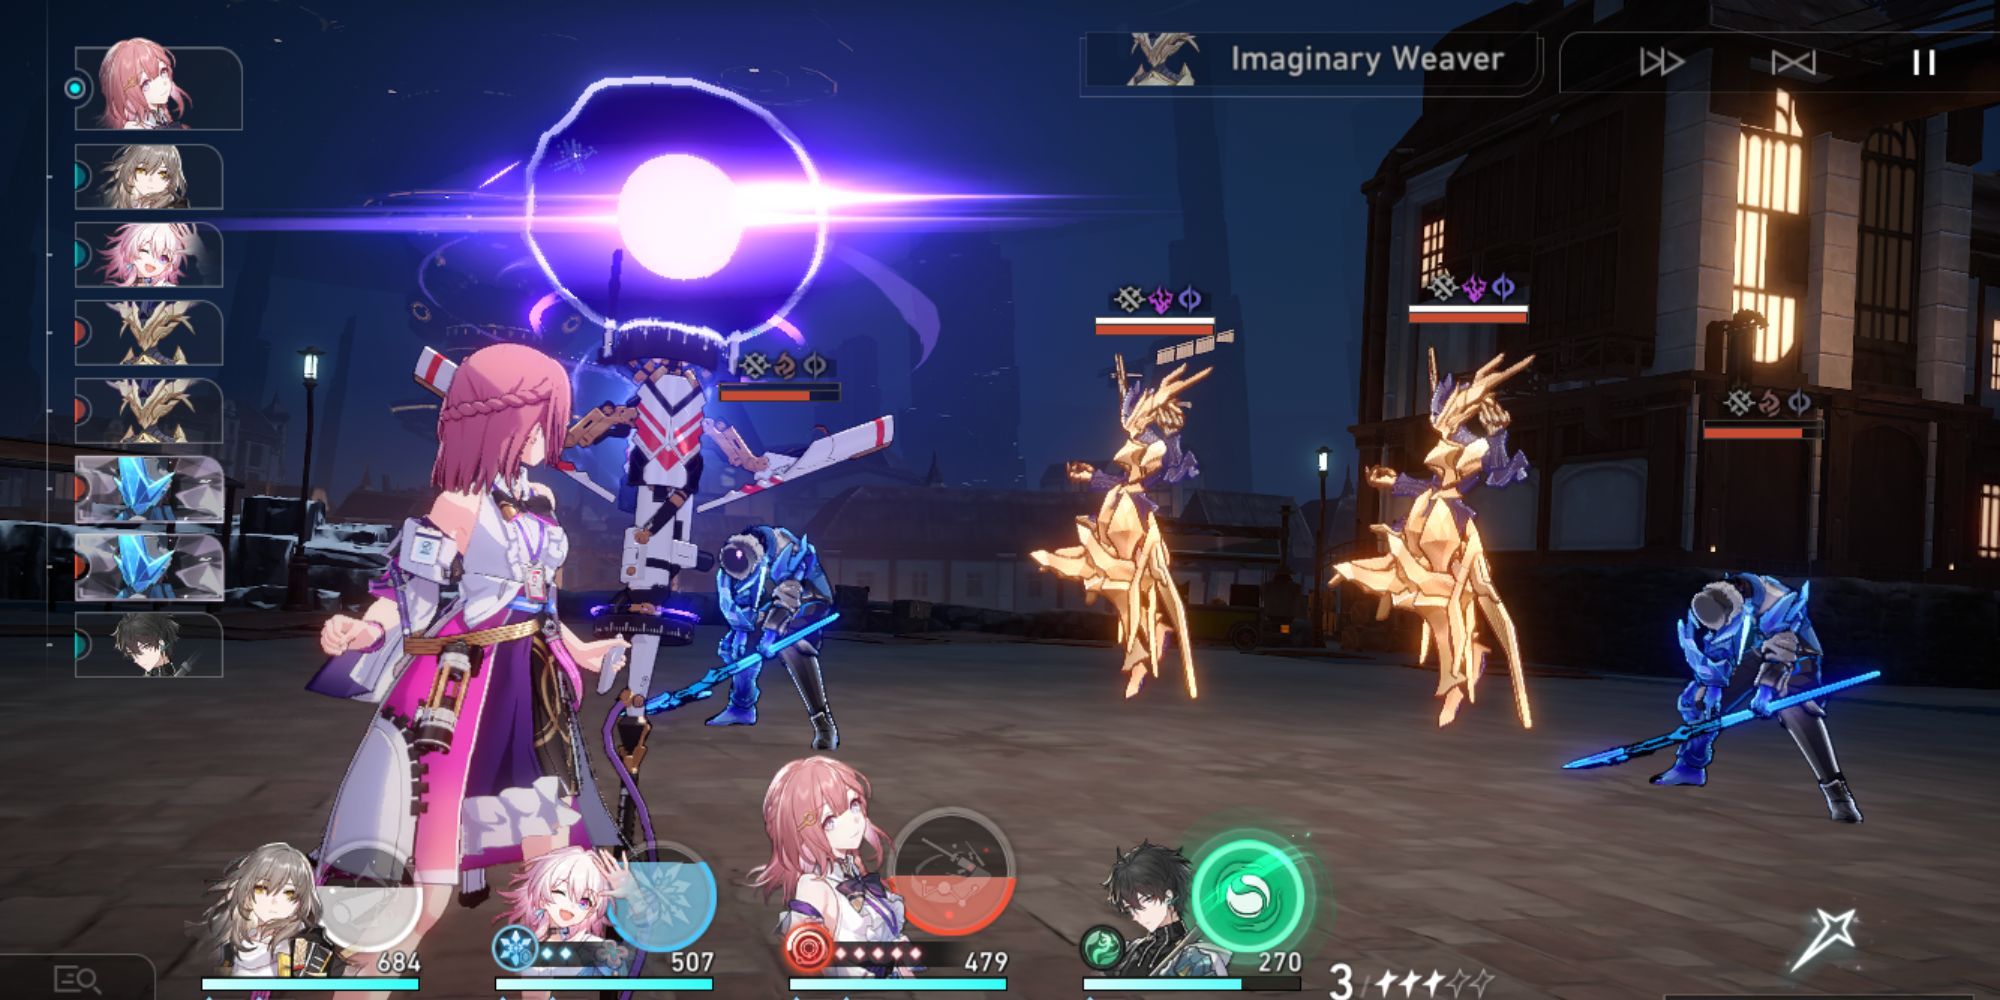 Honkai: Star Rail - Asta holds up her staff to use her Skill in battle